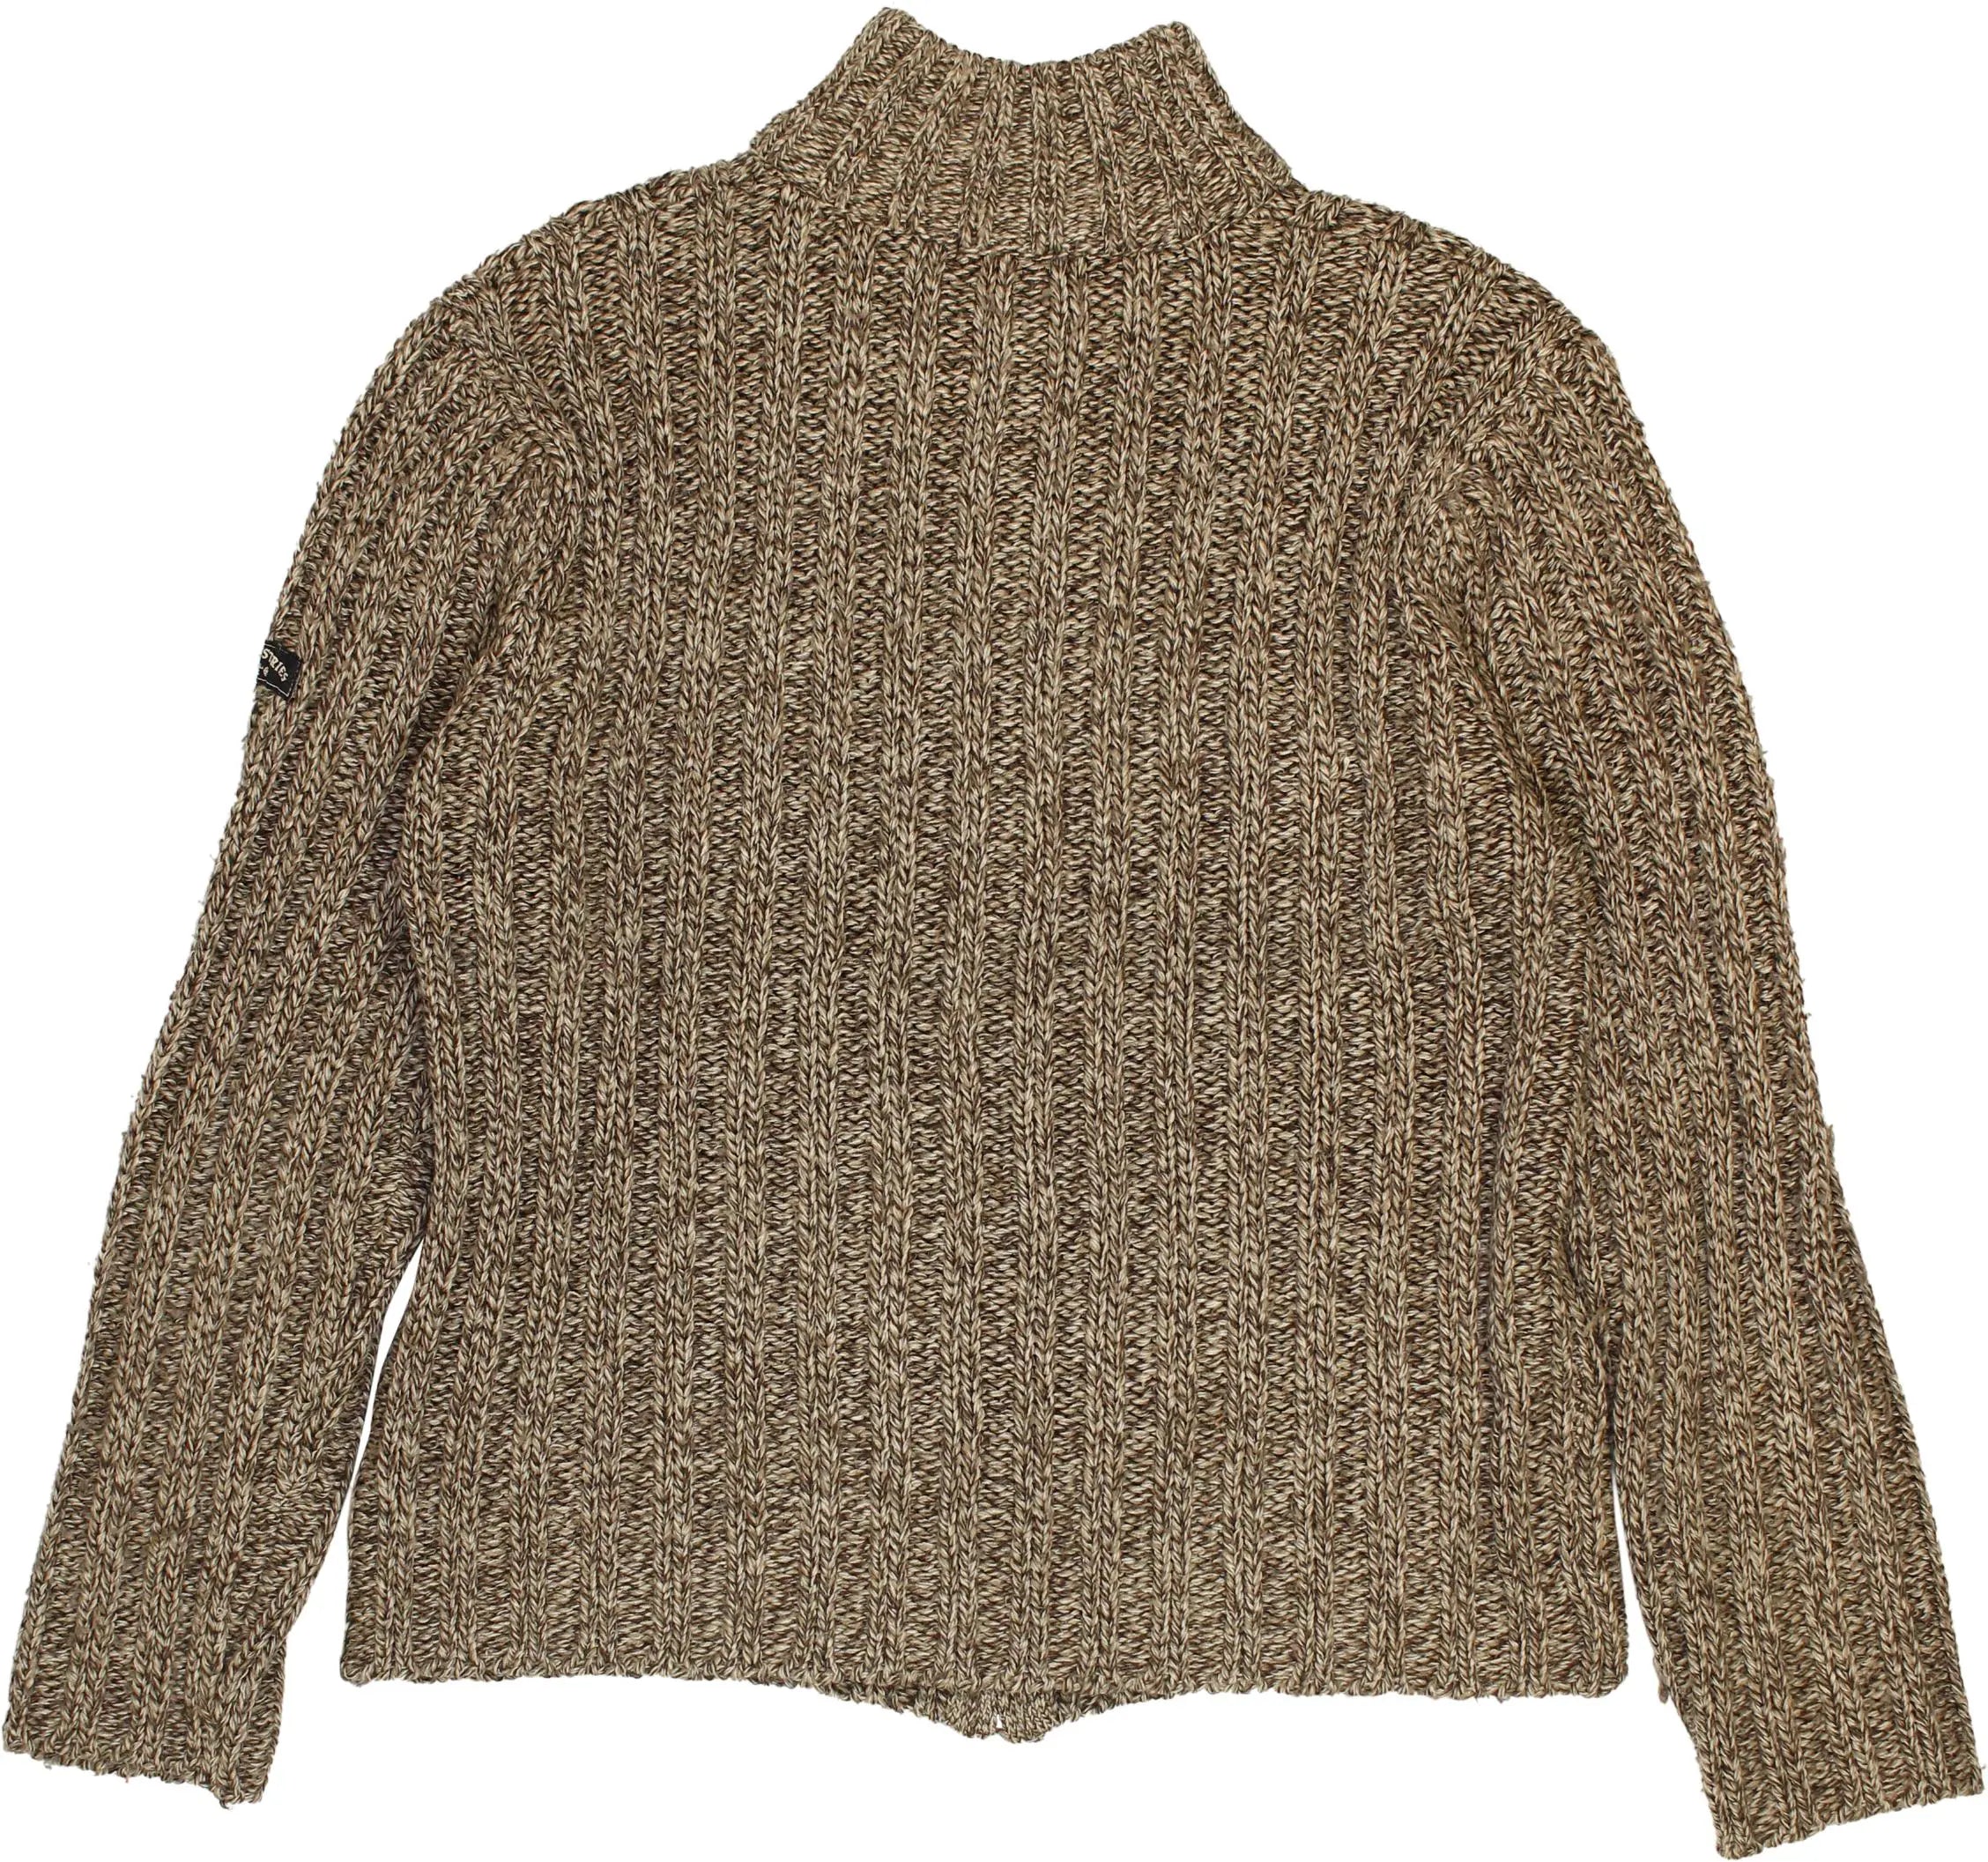 Mazz Company - Quarter Neck Jumper- ThriftTale.com - Vintage and second handclothing